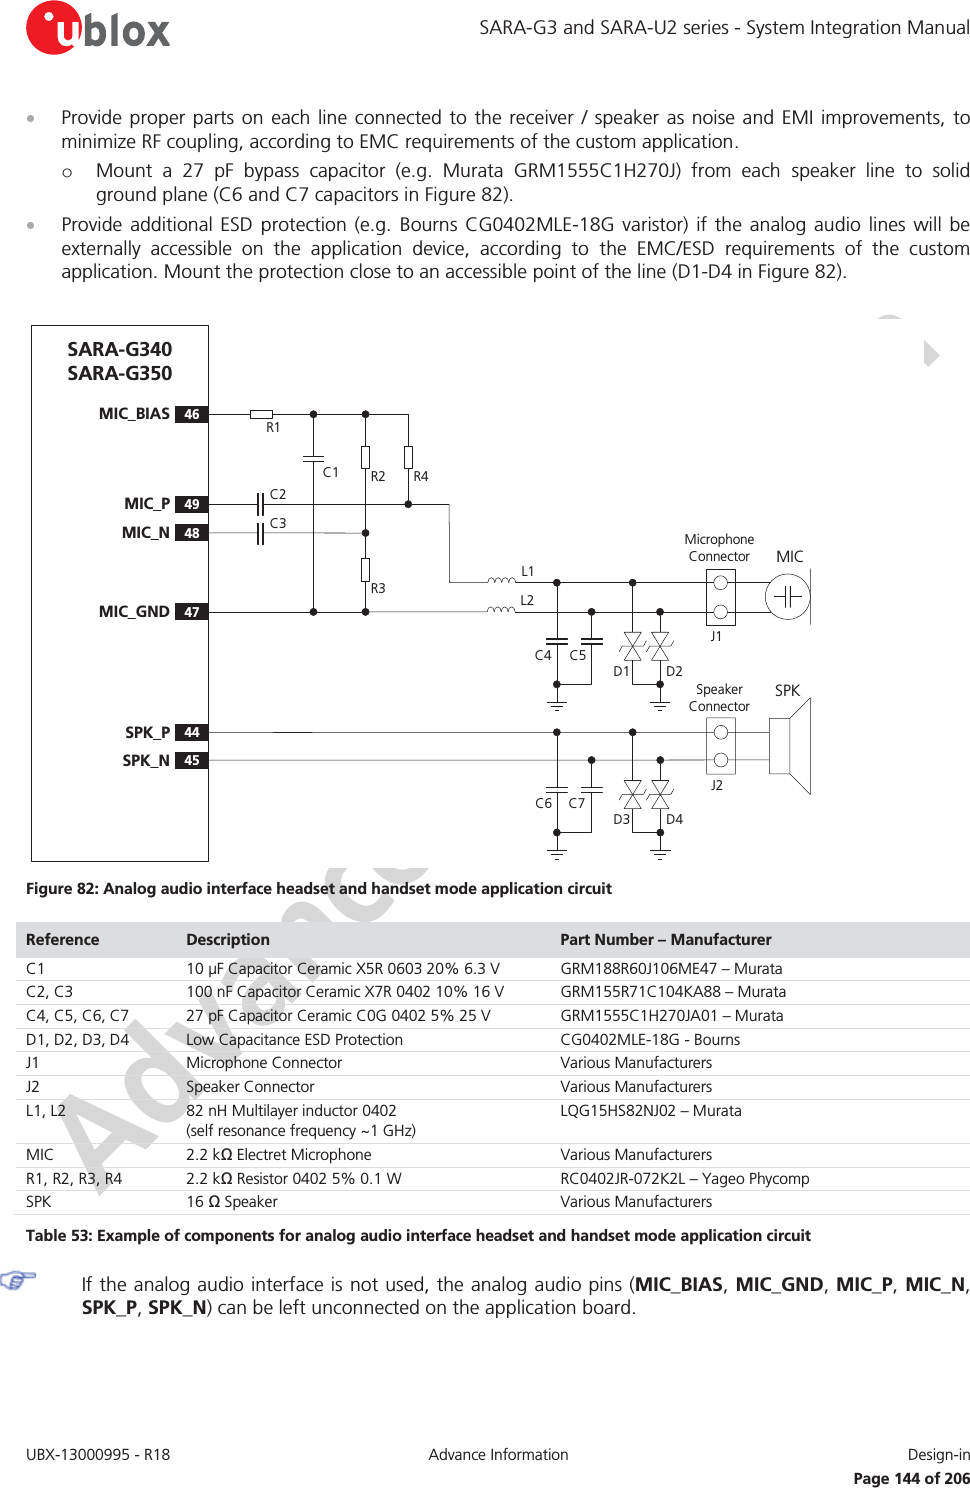 SARA-G3 and SARA-U2 series - System Integration Manual UBX-13000995 - R18  Advance Information  Design-in   Page 144 of 206 x Provide proper parts on each line connected to the receiver / speaker as noise and EMI improvements, to minimize RF coupling, according to EMC requirements of the custom application. o Mount a 27 pF bypass capacitor (e.g. Murata GRM1555C1H270J) from each speaker line to solid ground plane (C6 and C7 capacitors in Figure 82). x Provide additional ESD protection (e.g. Bourns CG0402MLE-18G varistor) if the analog audio lines will be externally accessible on the application device, according to the EMC/ESD requirements of the custom application. Mount the protection close to an accessible point of the line (D1-D4 in Figure 82).  SARA-G340 SARA-G35049MIC_PR1R2 R444SPK_P48MIC_N45SPK_NR3C146MIC_BIAS47MIC_GNDC2C3D3D1C6 C7L2L1C5C4SPKSpeaker ConnectorJ2Microphone Connector MICJ1D4D2 Figure 82: Analog audio interface headset and handset mode application circuit Reference  Description  Part Number – Manufacturer C1 10 μF Capacitor Ceramic X5R 0603 20% 6.3 V GRM188R60J106ME47 – Murata C2, C3 100 nF Capacitor Ceramic X7R 0402 10% 16 V GRM155R71C104KA88 – Murata C4, C5, C6, C7 27 pF Capacitor Ceramic C0G 0402 5% 25 V  GRM1555C1H270JA01 – Murata D1, D2, D3, D4 Low Capacitance ESD Protection CG0402MLE-18G - Bourns J1 Microphone Connector Various Manufacturers  J2 Speaker Connector Various Manufacturers  L1, L2 82 nH Multilayer inductor 0402 (self resonance frequency ~1 GHz) LQG15HS82NJ02 – Murata MIC 2.2 kΩ Electret Microphone Various Manufacturers R1, R2, R3, R4 2.2 kΩ Resistor 0402 5% 0.1 W  RC0402JR-072K2L – Yageo Phycomp SPK 16 Ω Speaker  Various Manufacturers Table 53: Example of components for analog audio interface headset and handset mode application circuit  If the analog audio interface is not used, the analog audio pins (MIC_BIAS, MIC_GND, MIC_P, MIC_N, SPK_P, SPK_N) can be left unconnected on the application board.  